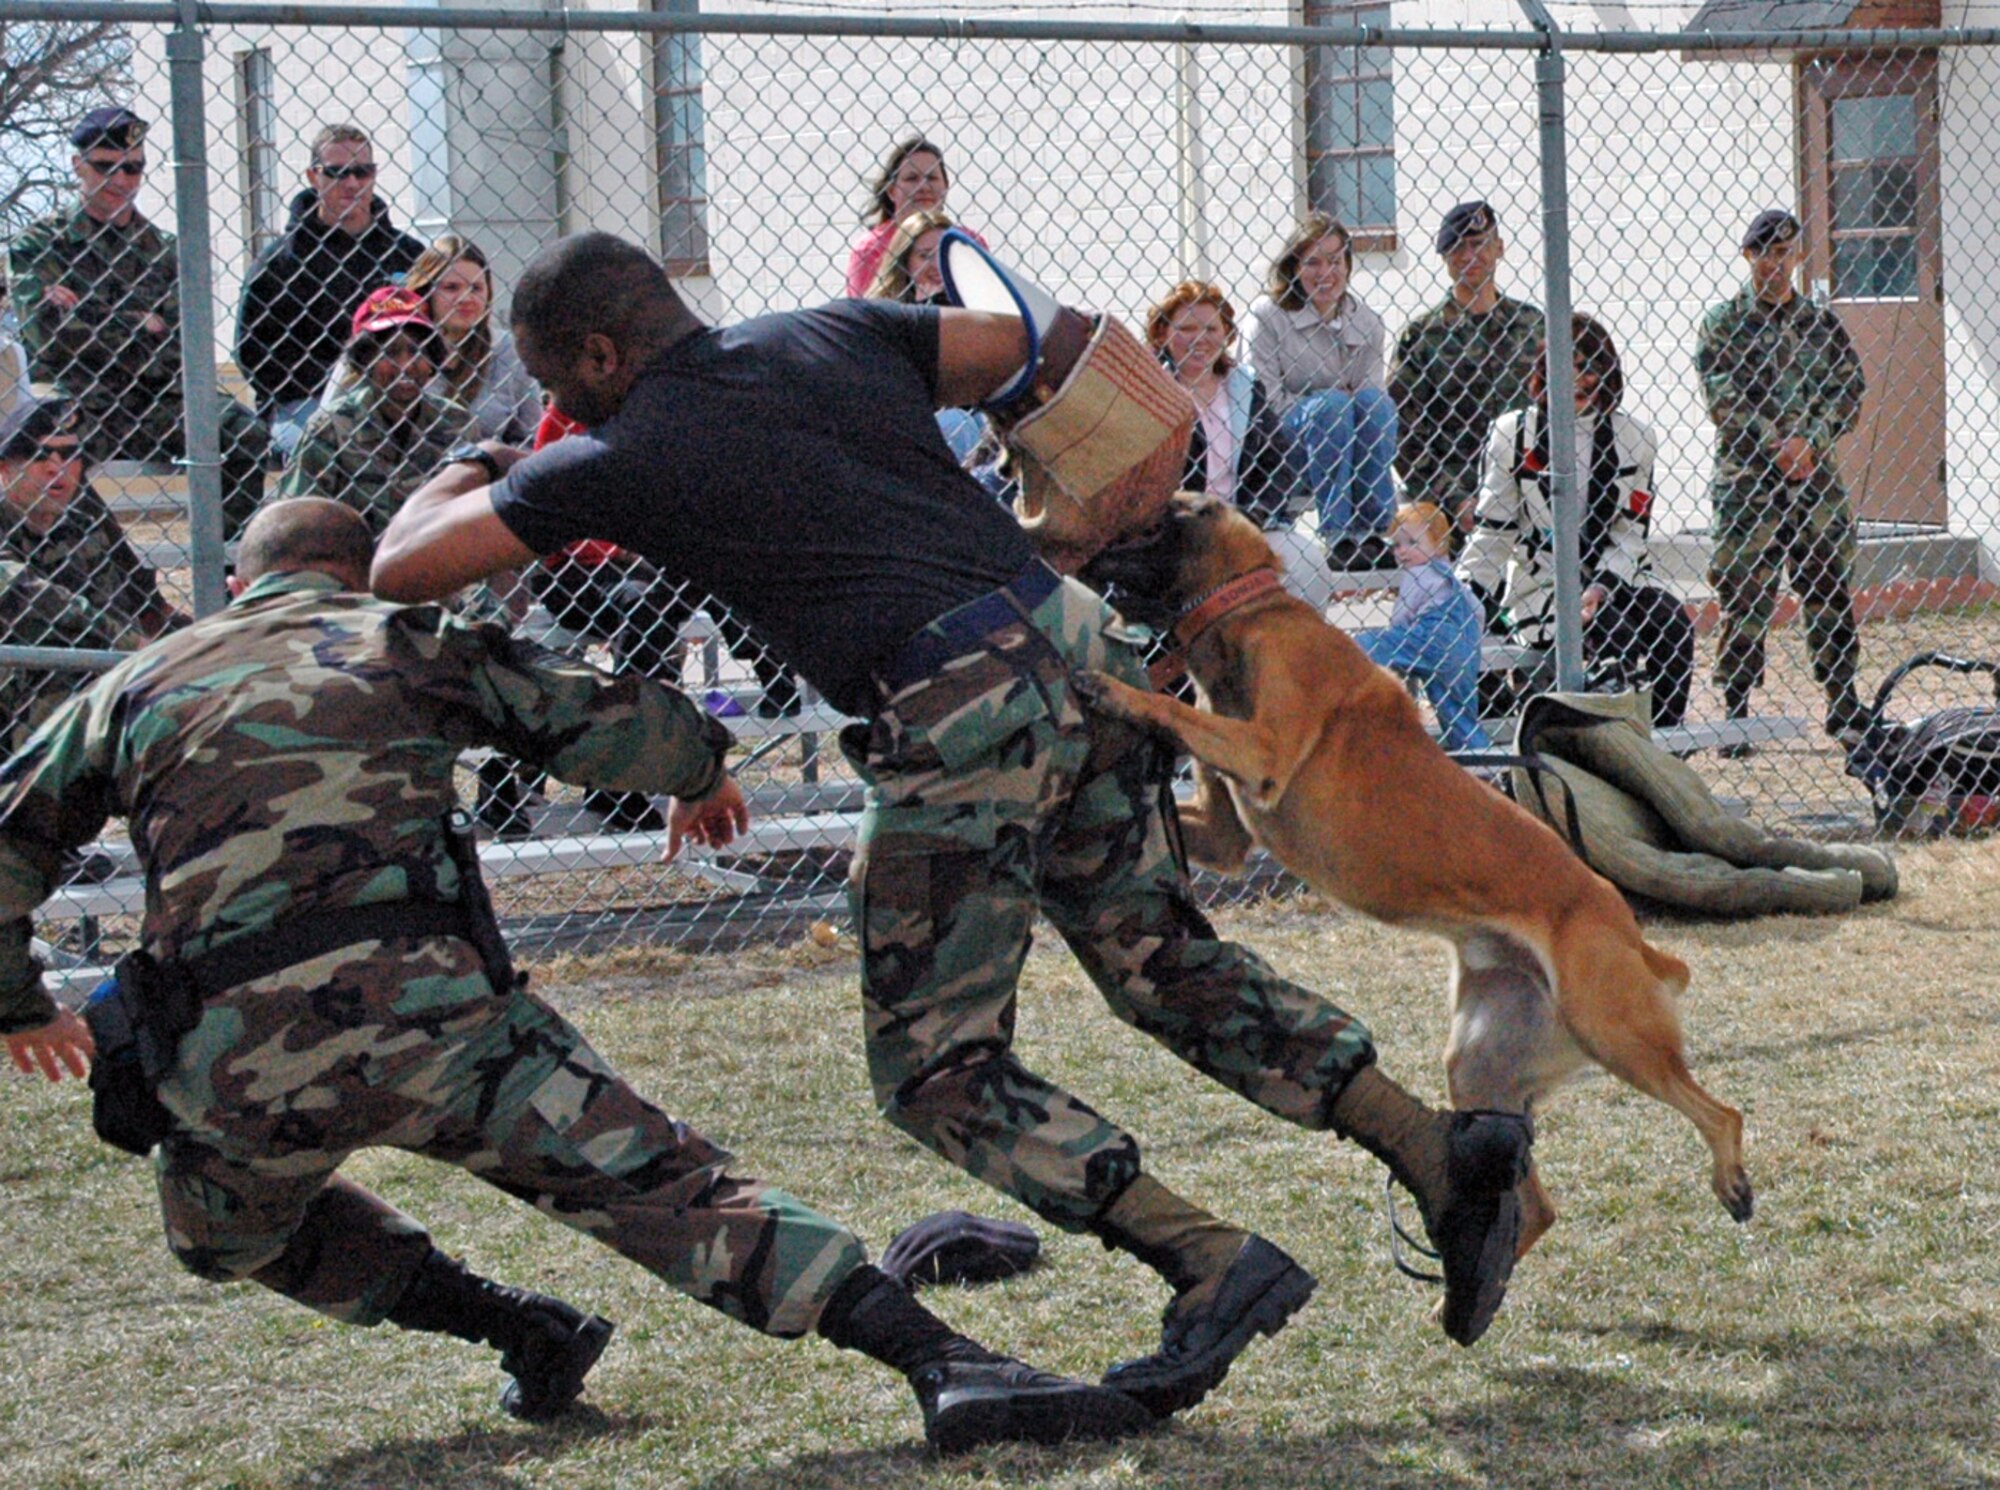 Tech. Sgt. Harold Gardner, 90th Security Forces Squadron, rushes Staff Sgt. Stacey Trucott, 90th SFS, in a demonstration for the 90th Security Forces Group spouses tour March 22. The rush act demonstrated that Zak, 90th SFS working dog, and any police canine will attack without order if their handler is being threatened (Photos by Airman Alex Martinez).